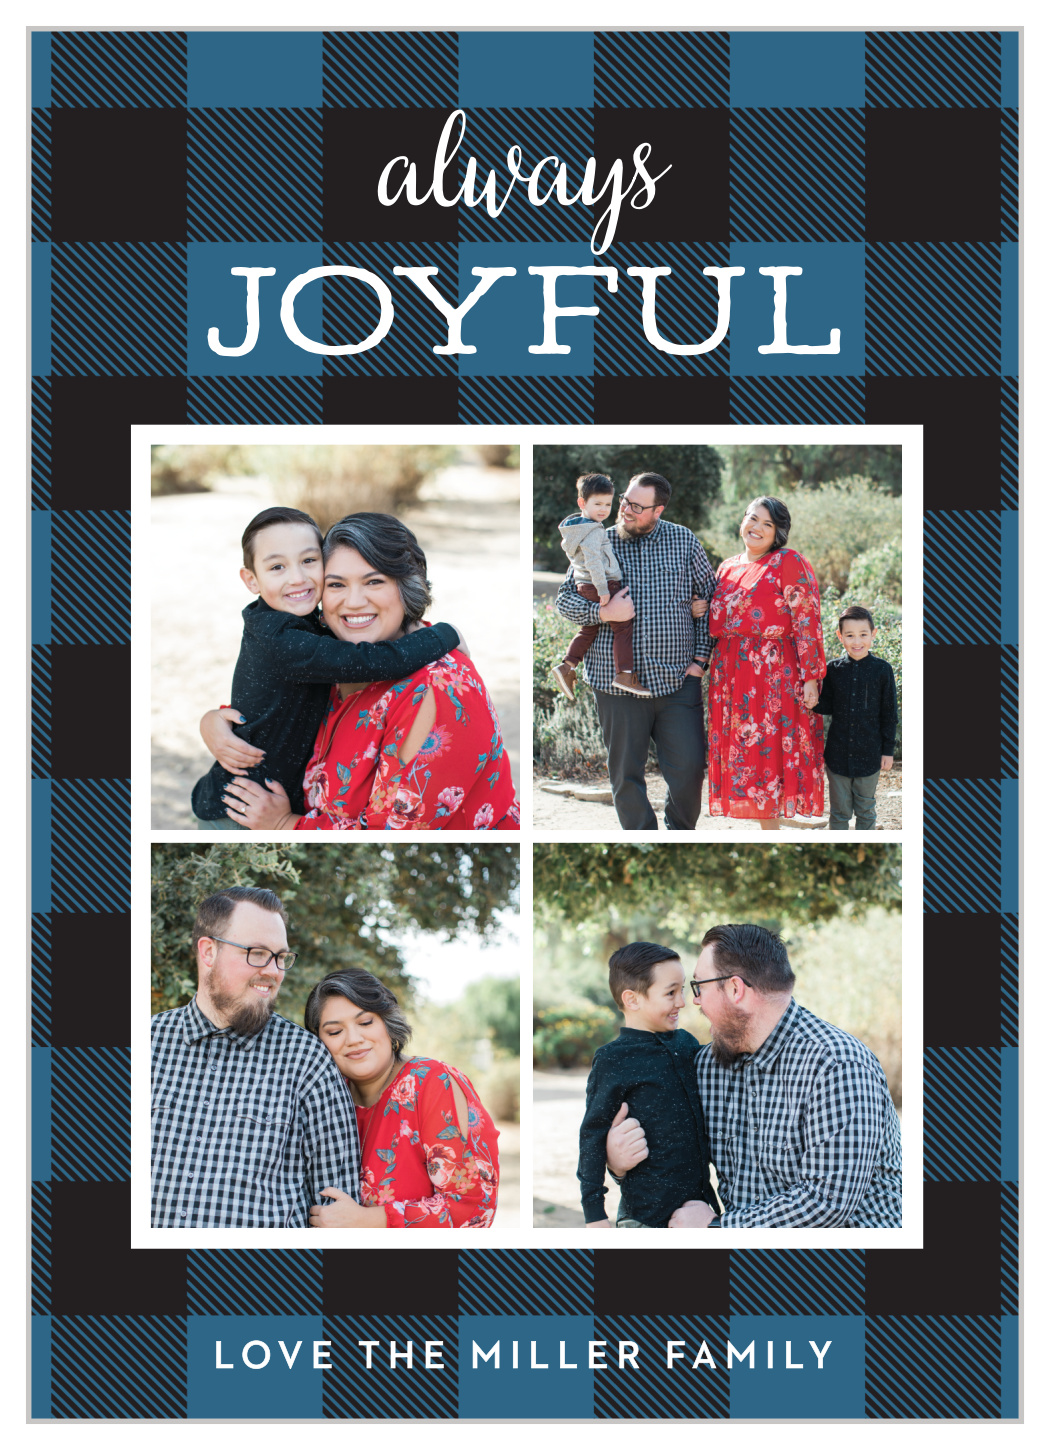 Rustic Plaid Holiday Cards